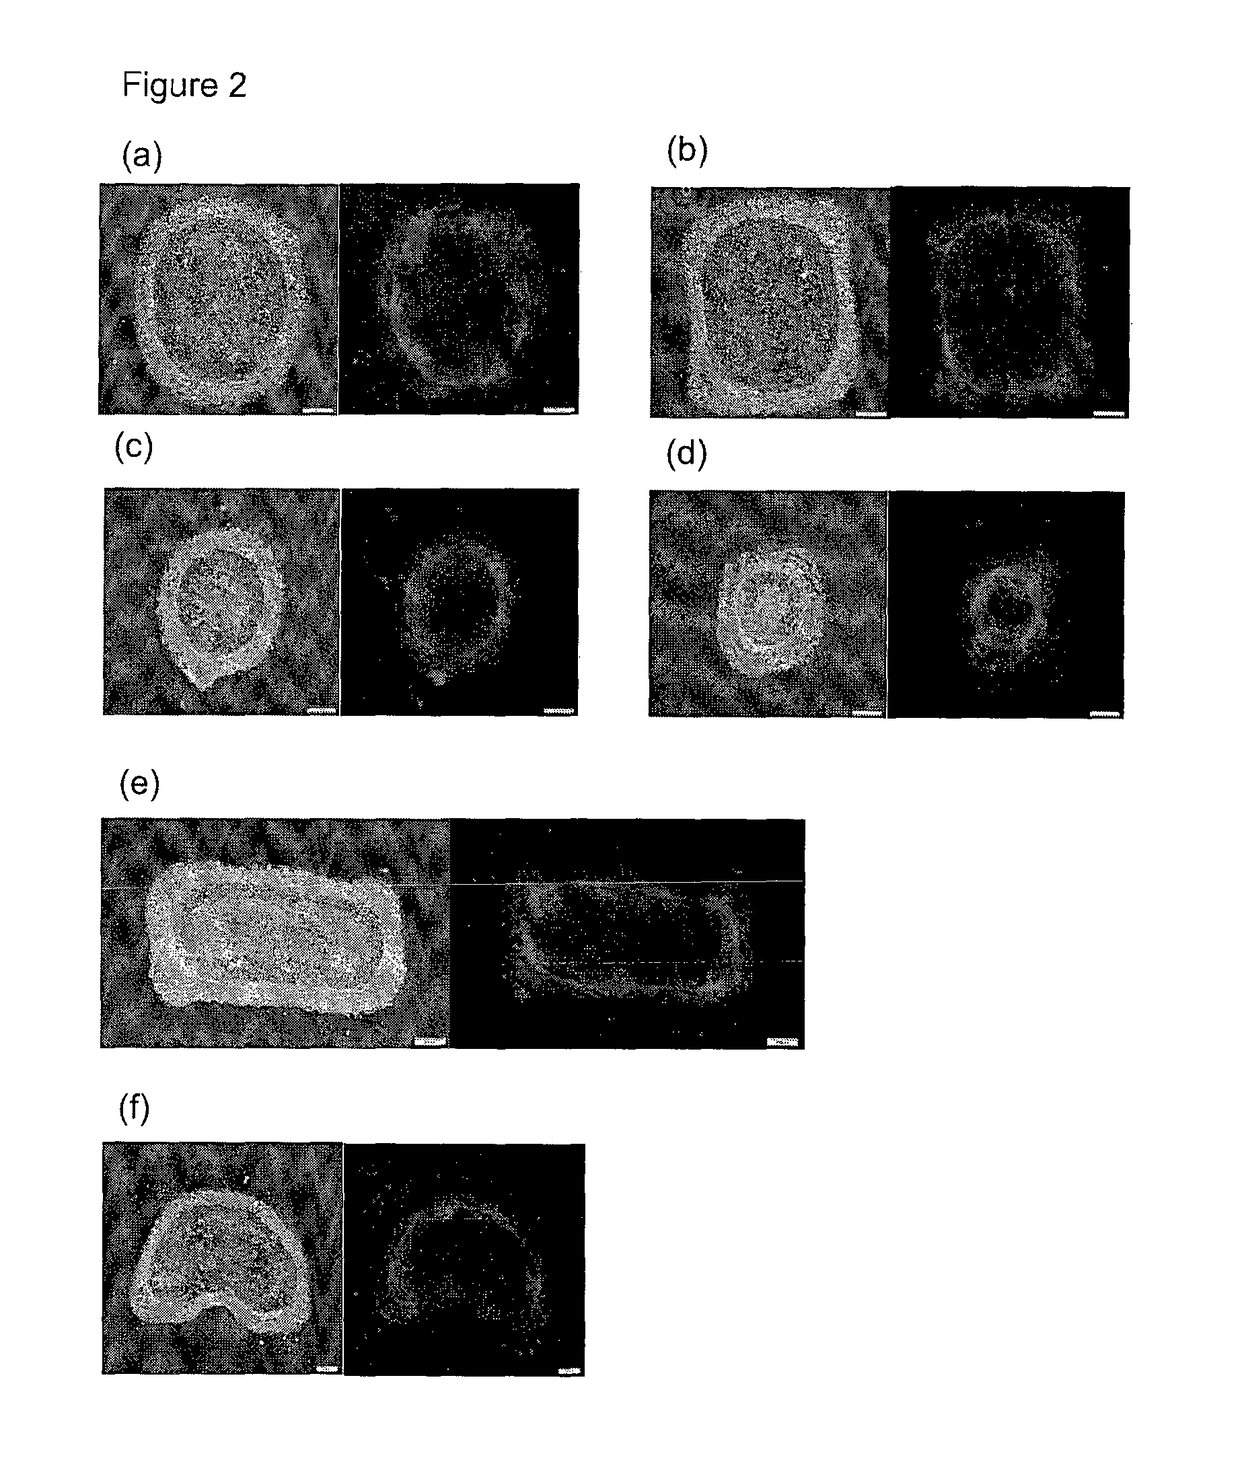 Method and system for in vitro developmental toxicity testing